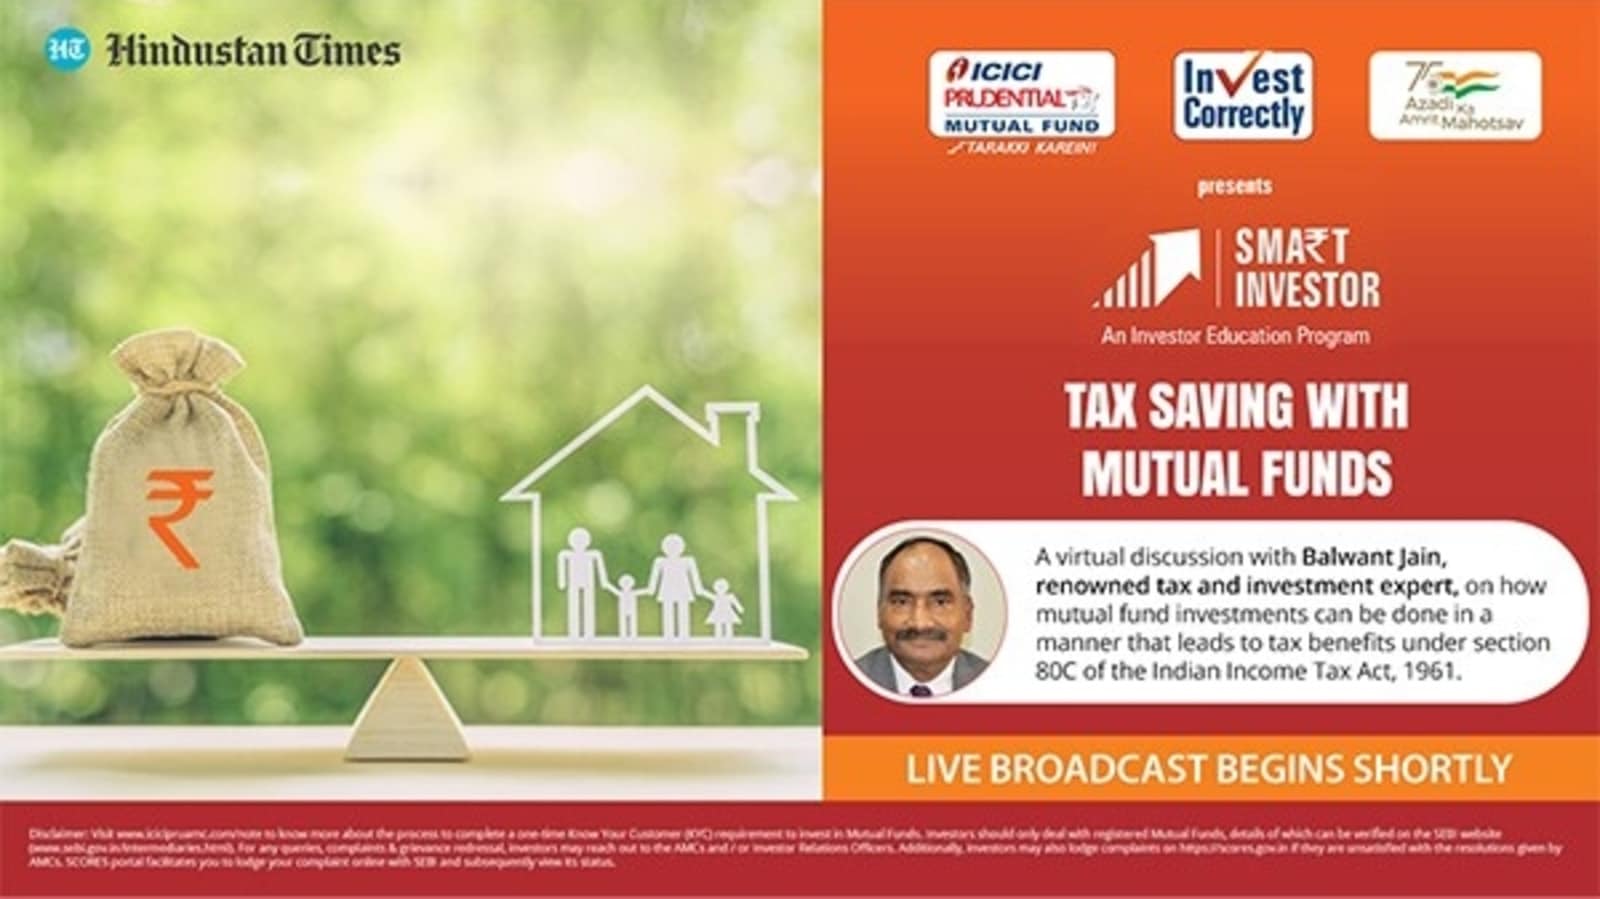 invest-into-mutual-funds-to-save-on-taxes-hindustan-times